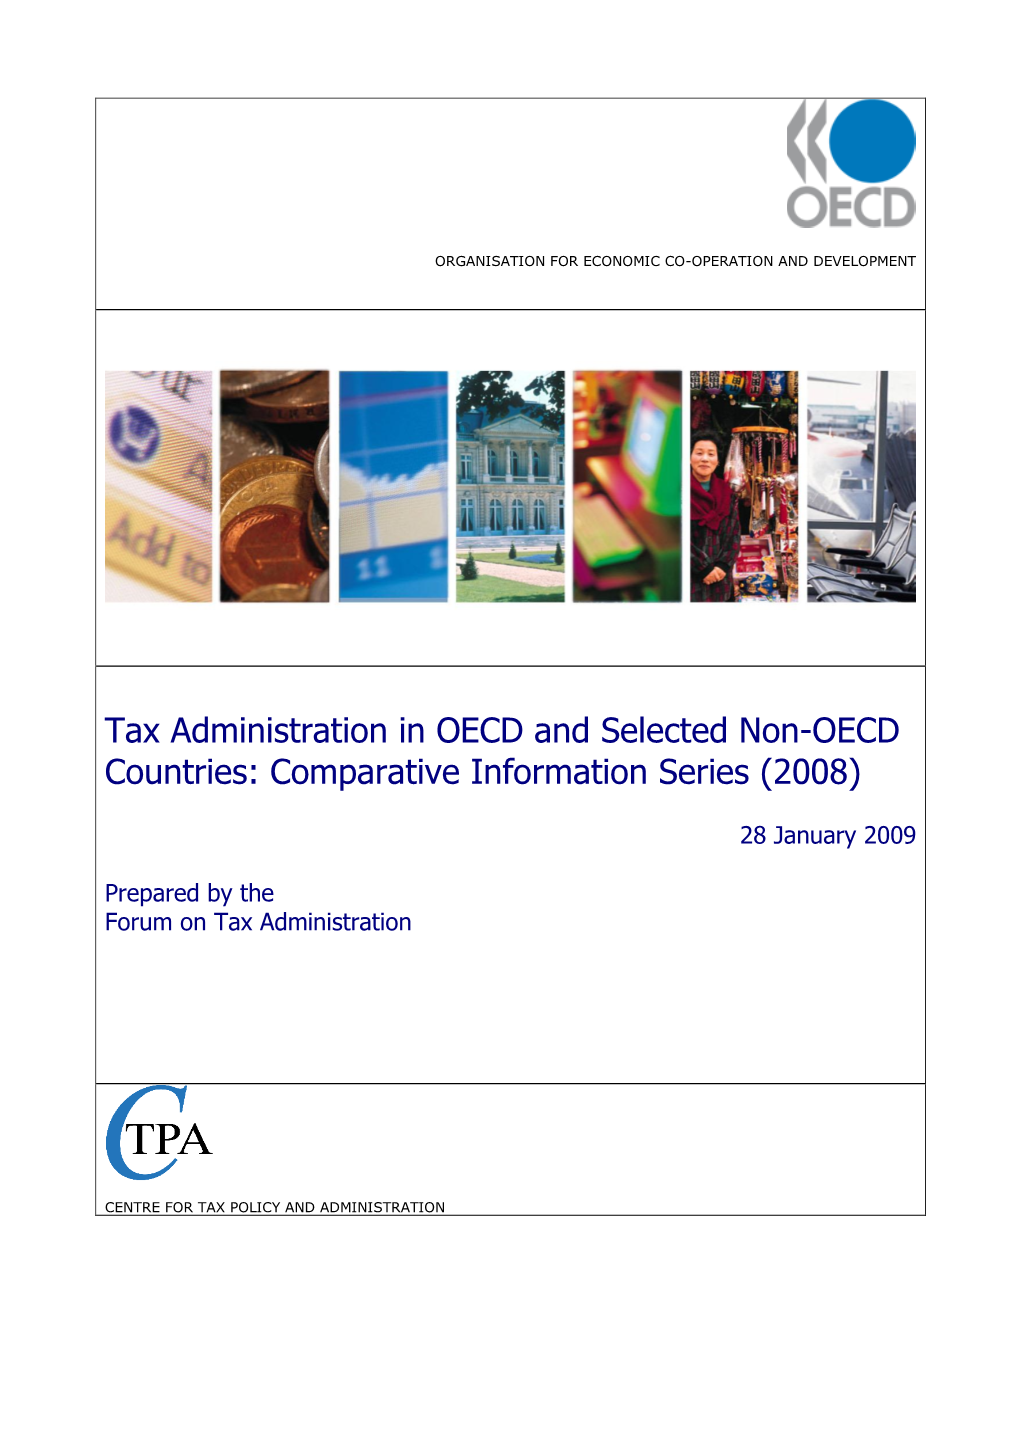 Institutional Arrangements for Tax Administration Operations